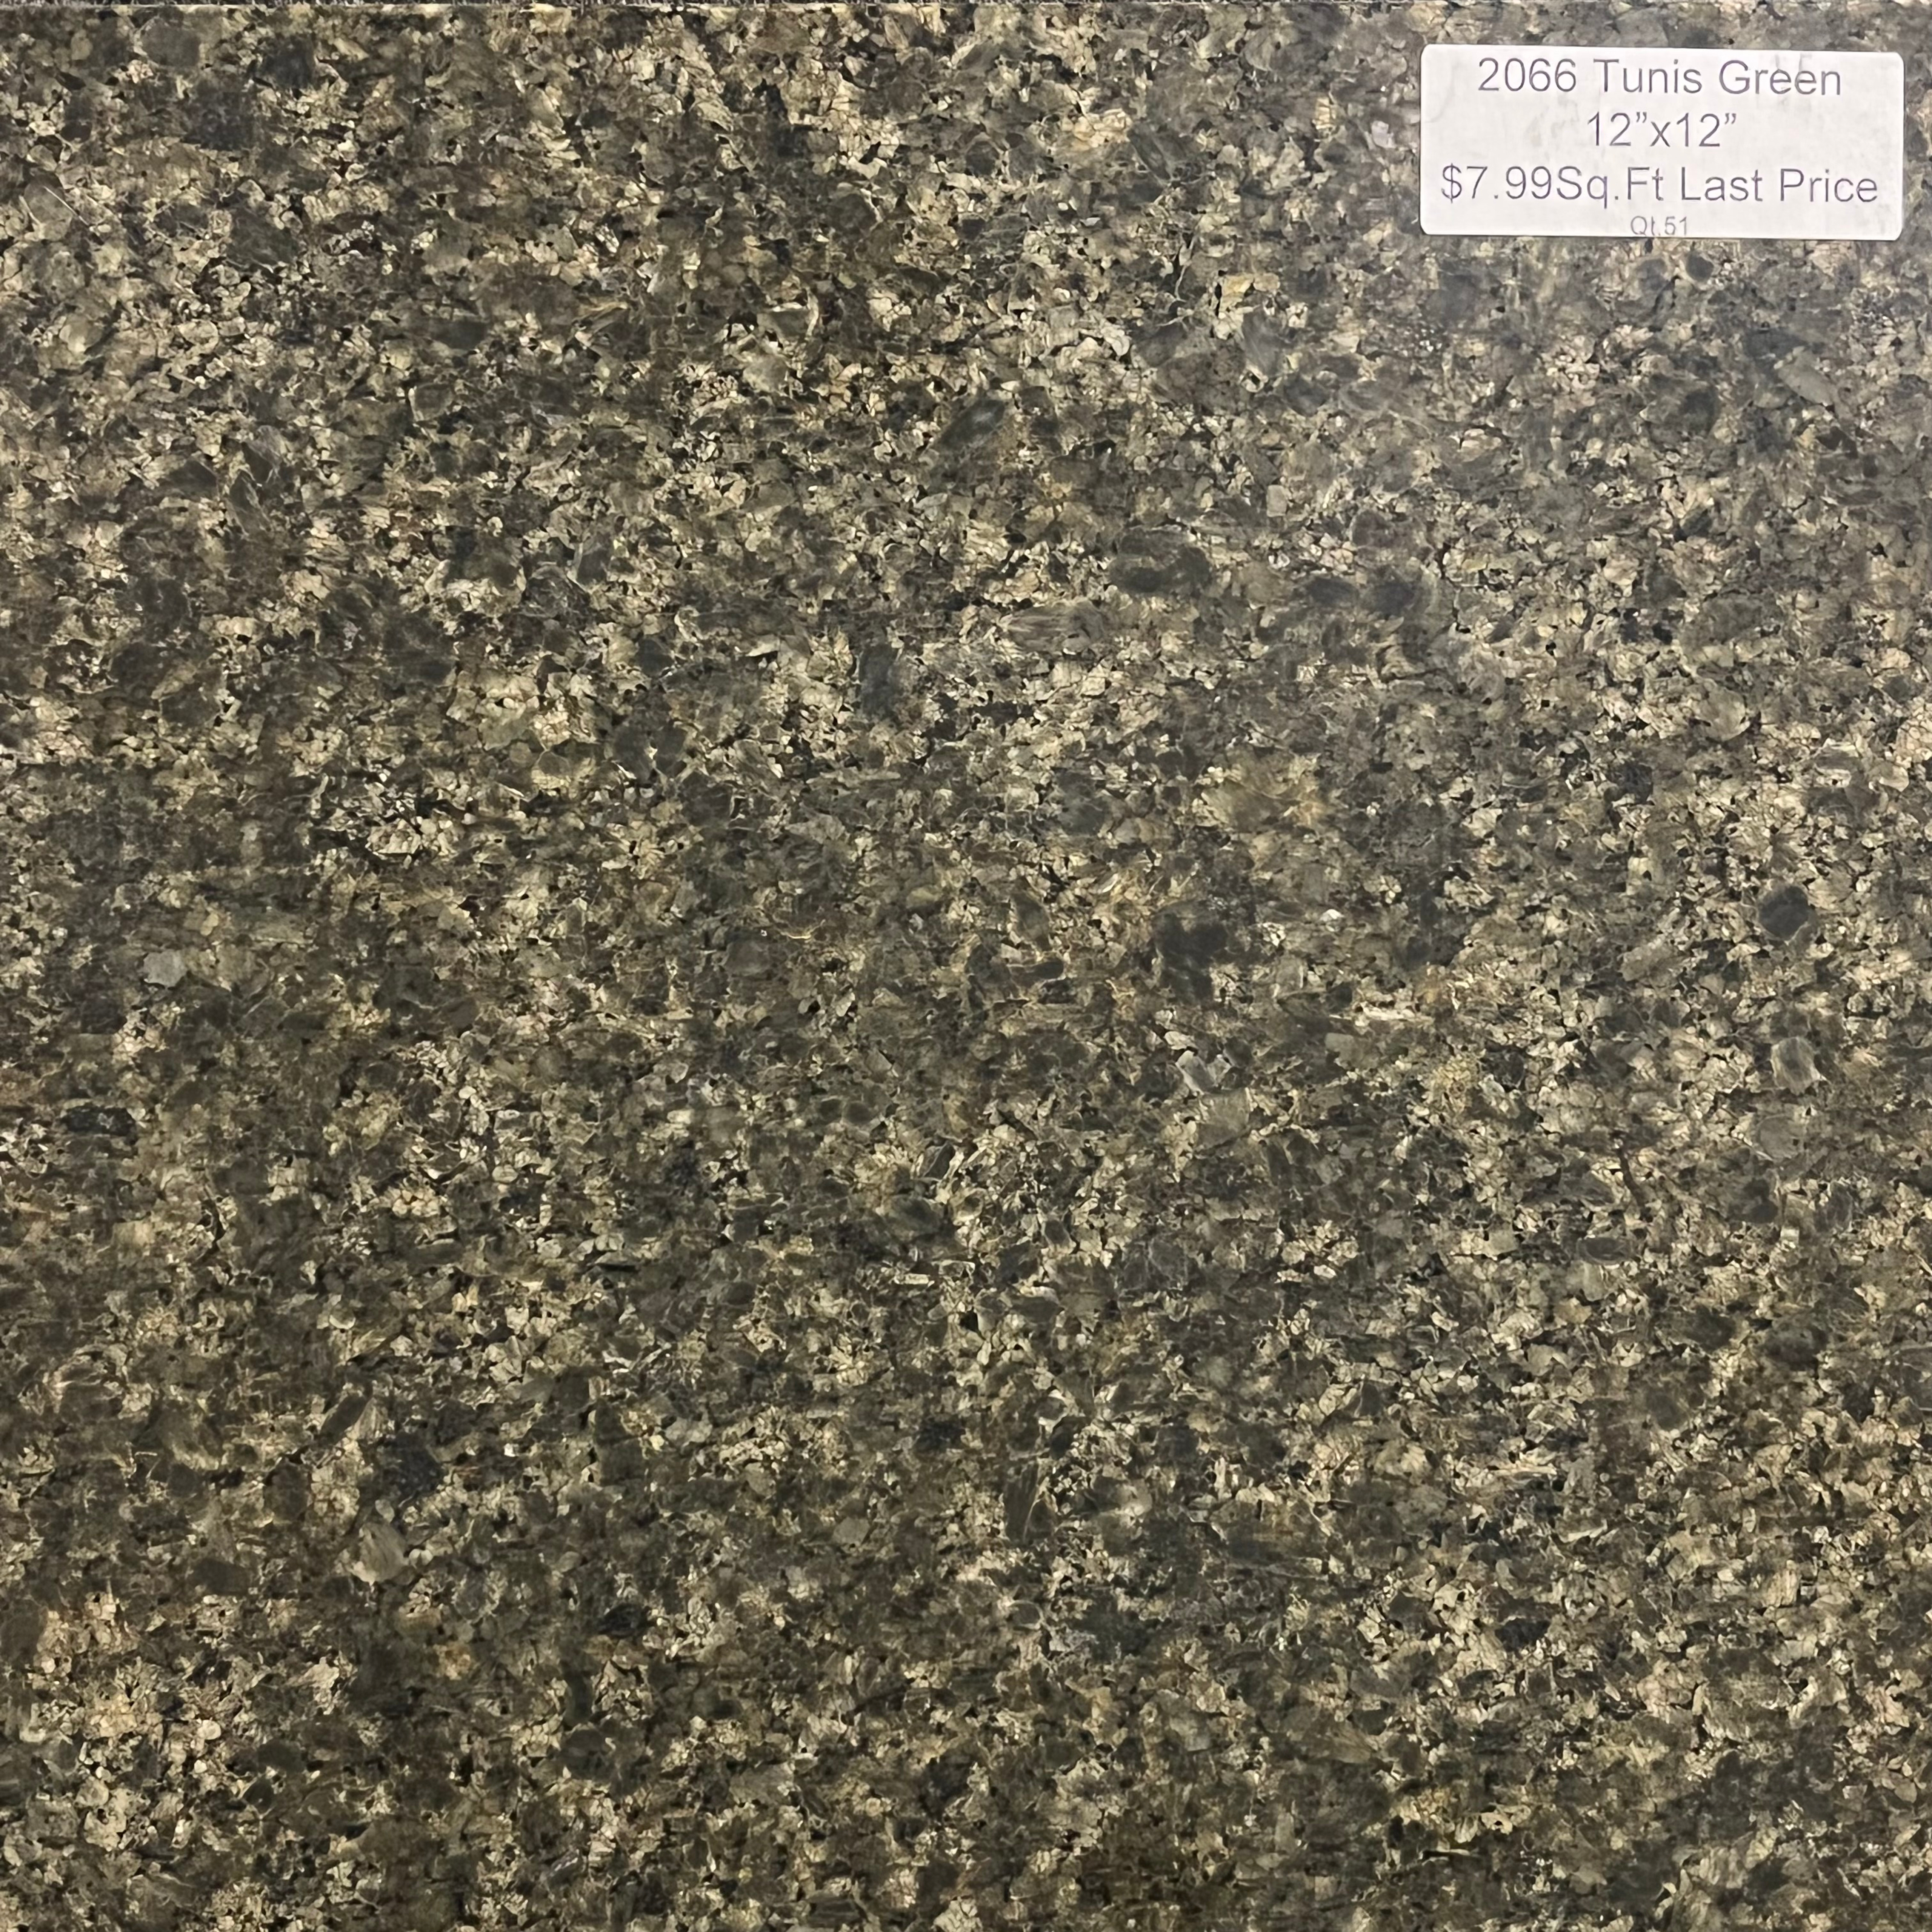 2066 Tunis Green 12x12 Polished $7.99 Sq. Ft. Closeout Granite Tile (51 Sq. Ft. Left)